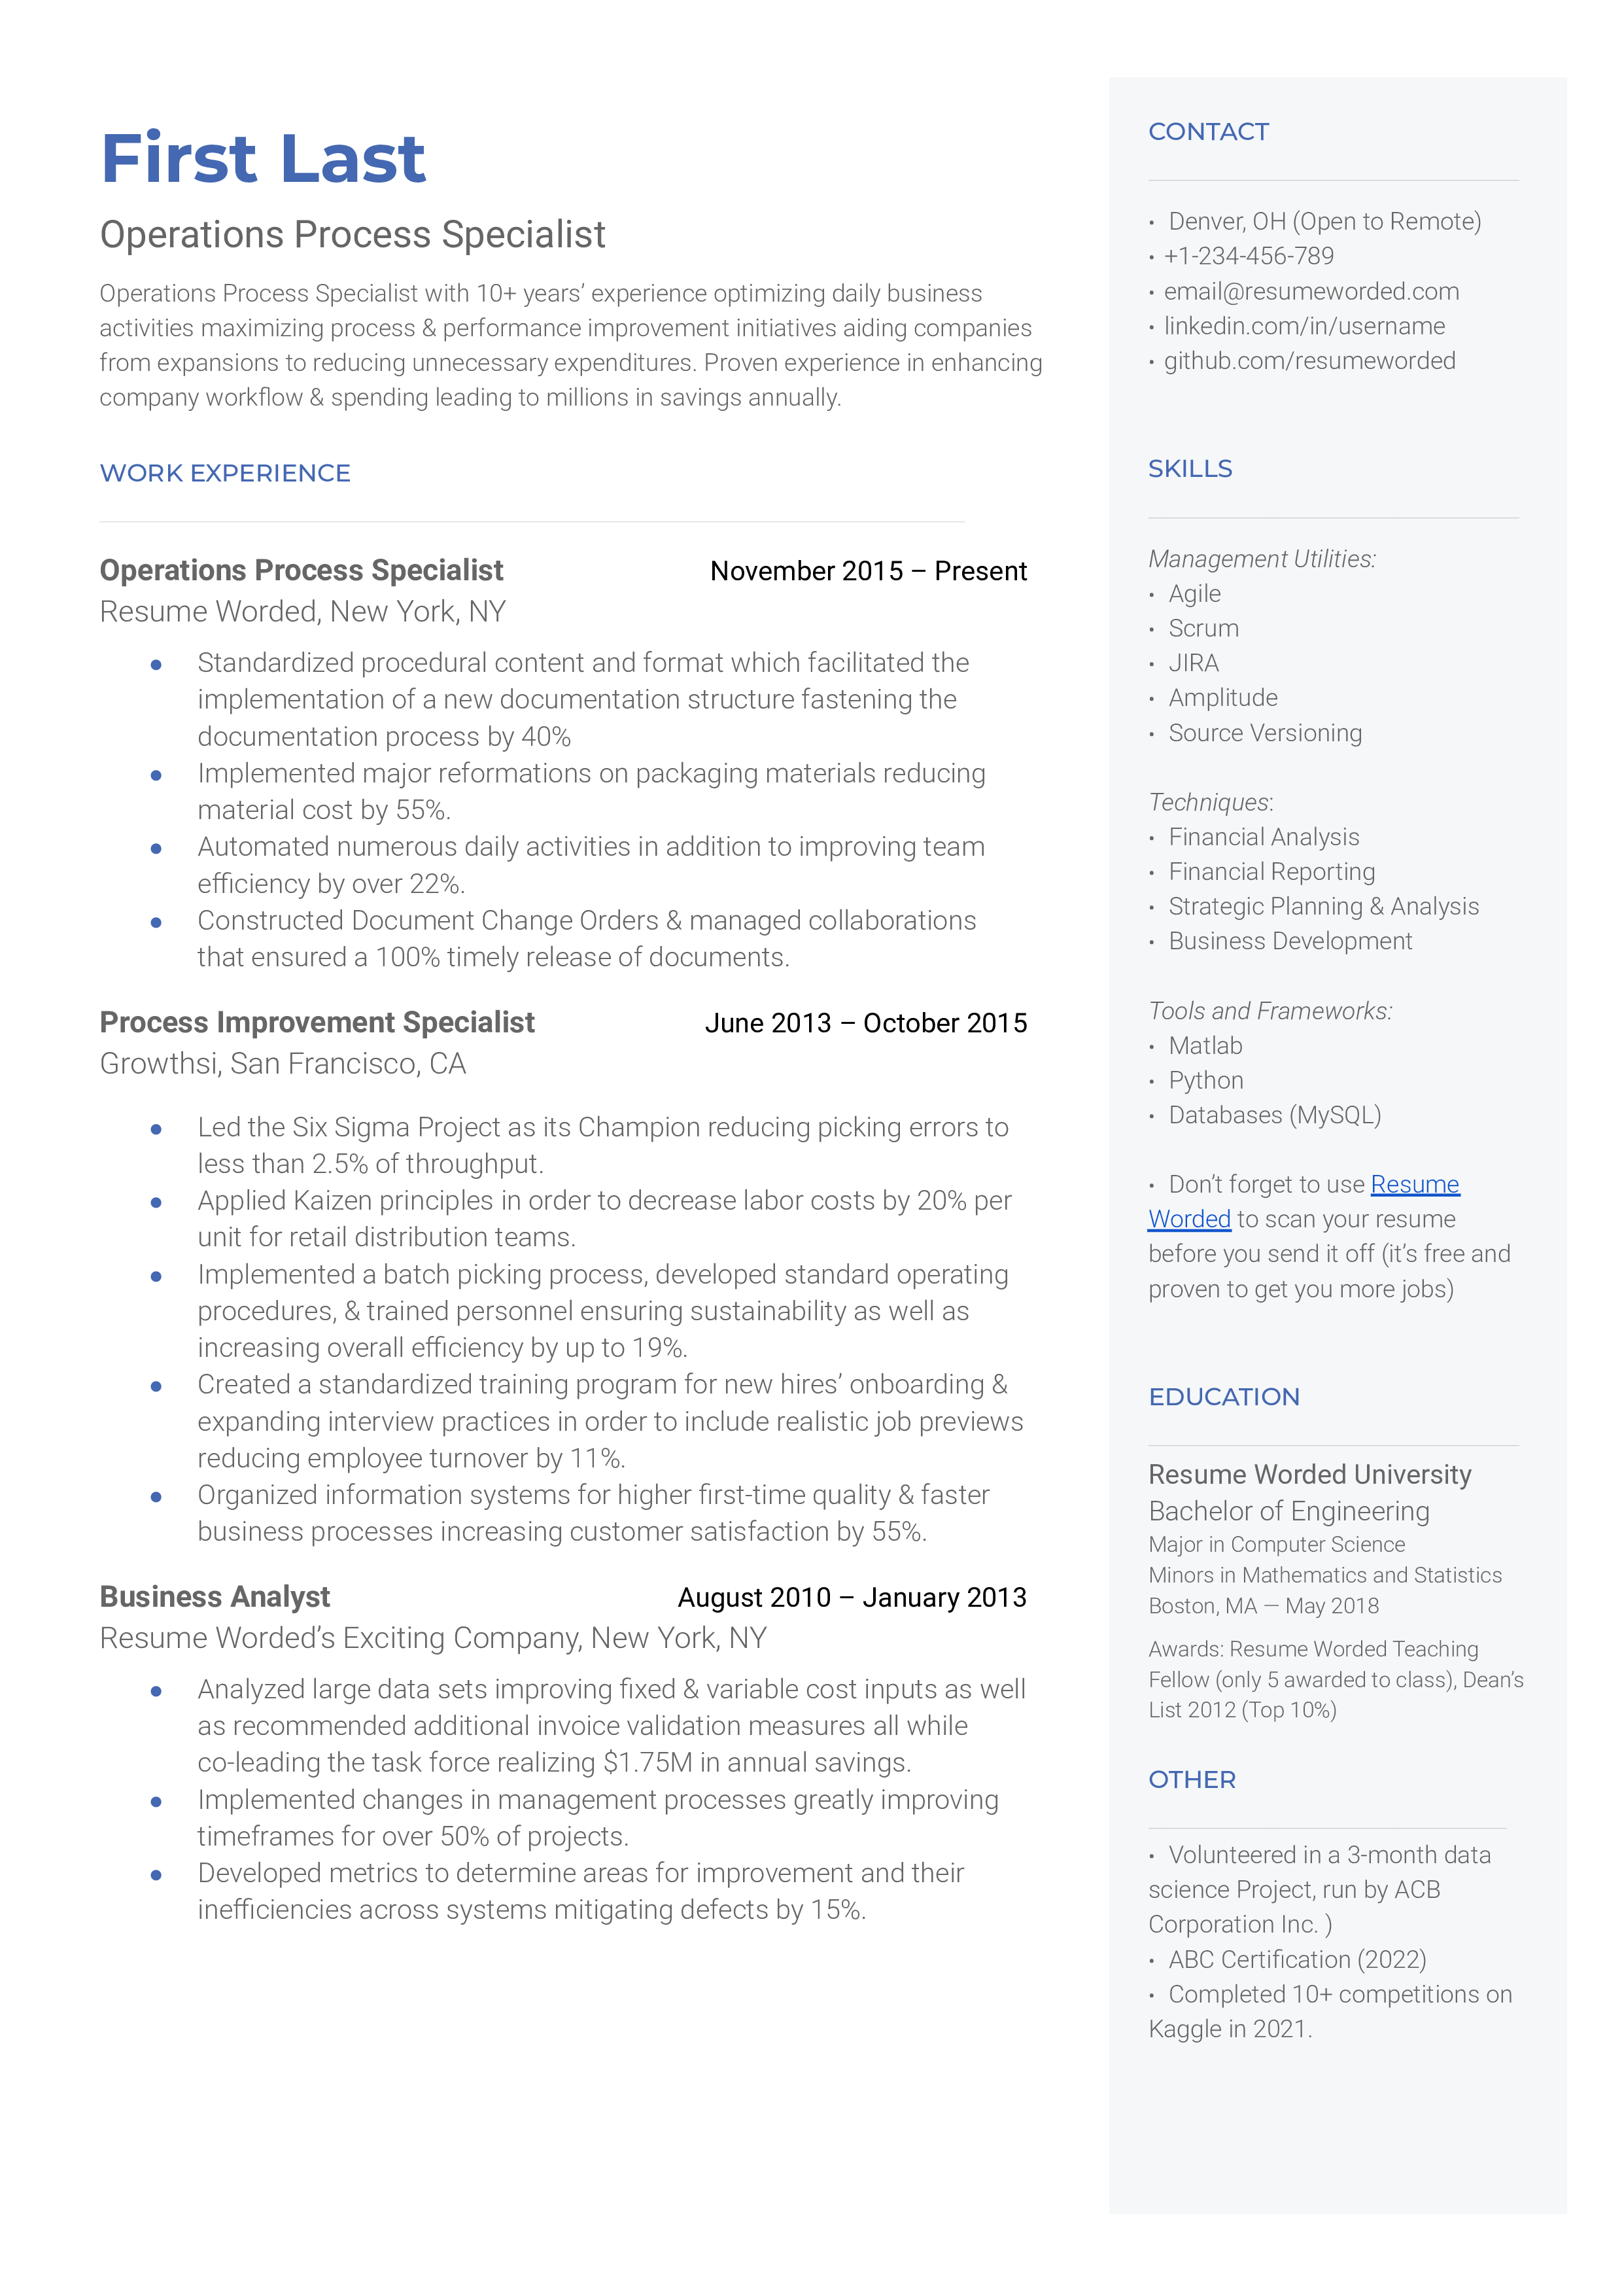 Operations Process Specialist Resume Sample